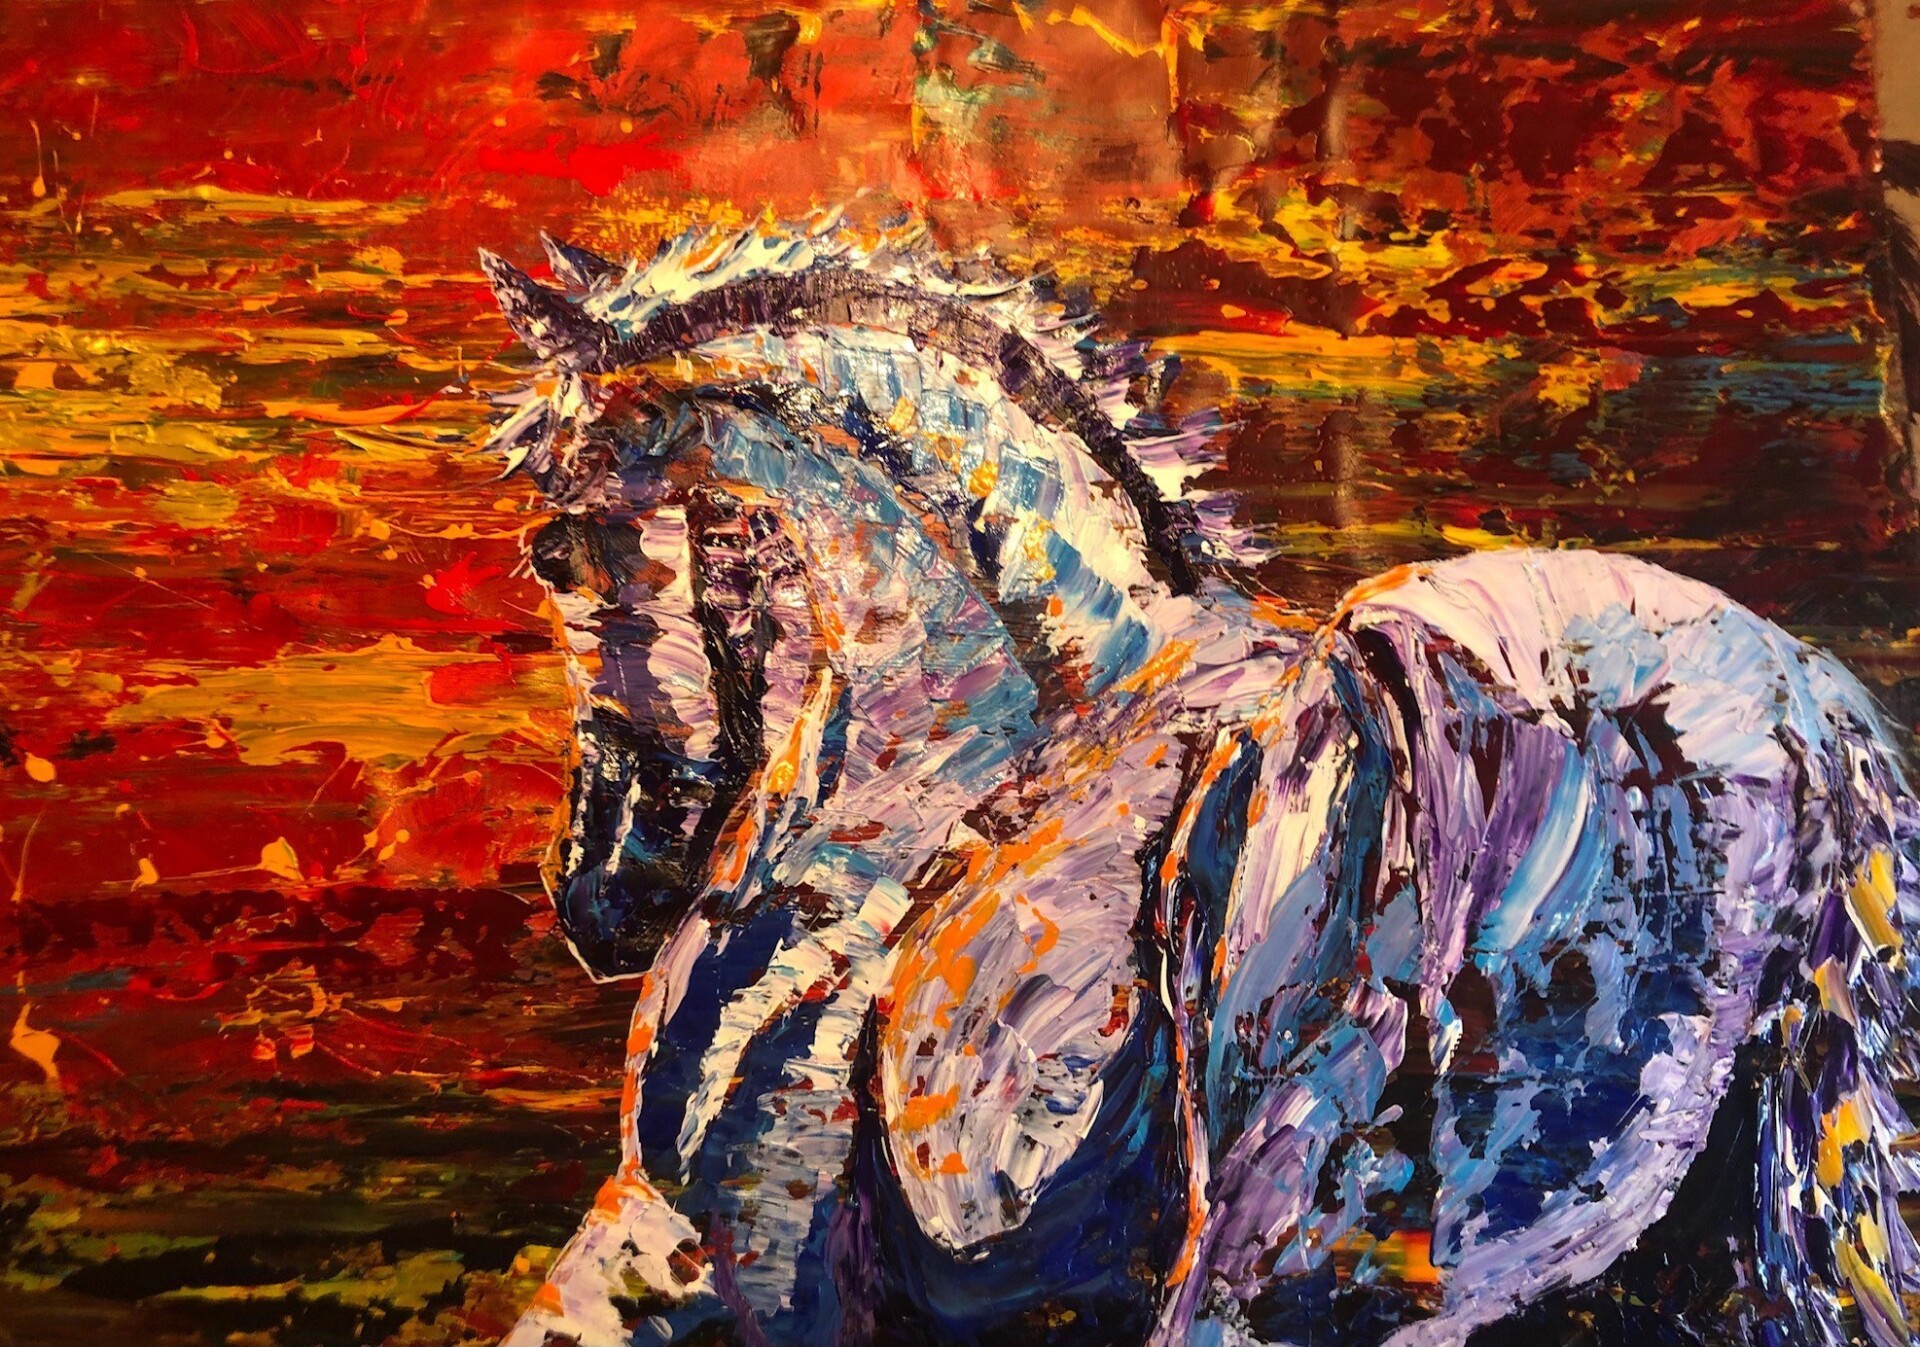 Wild Horses painted by Dr. Cynthia Williams